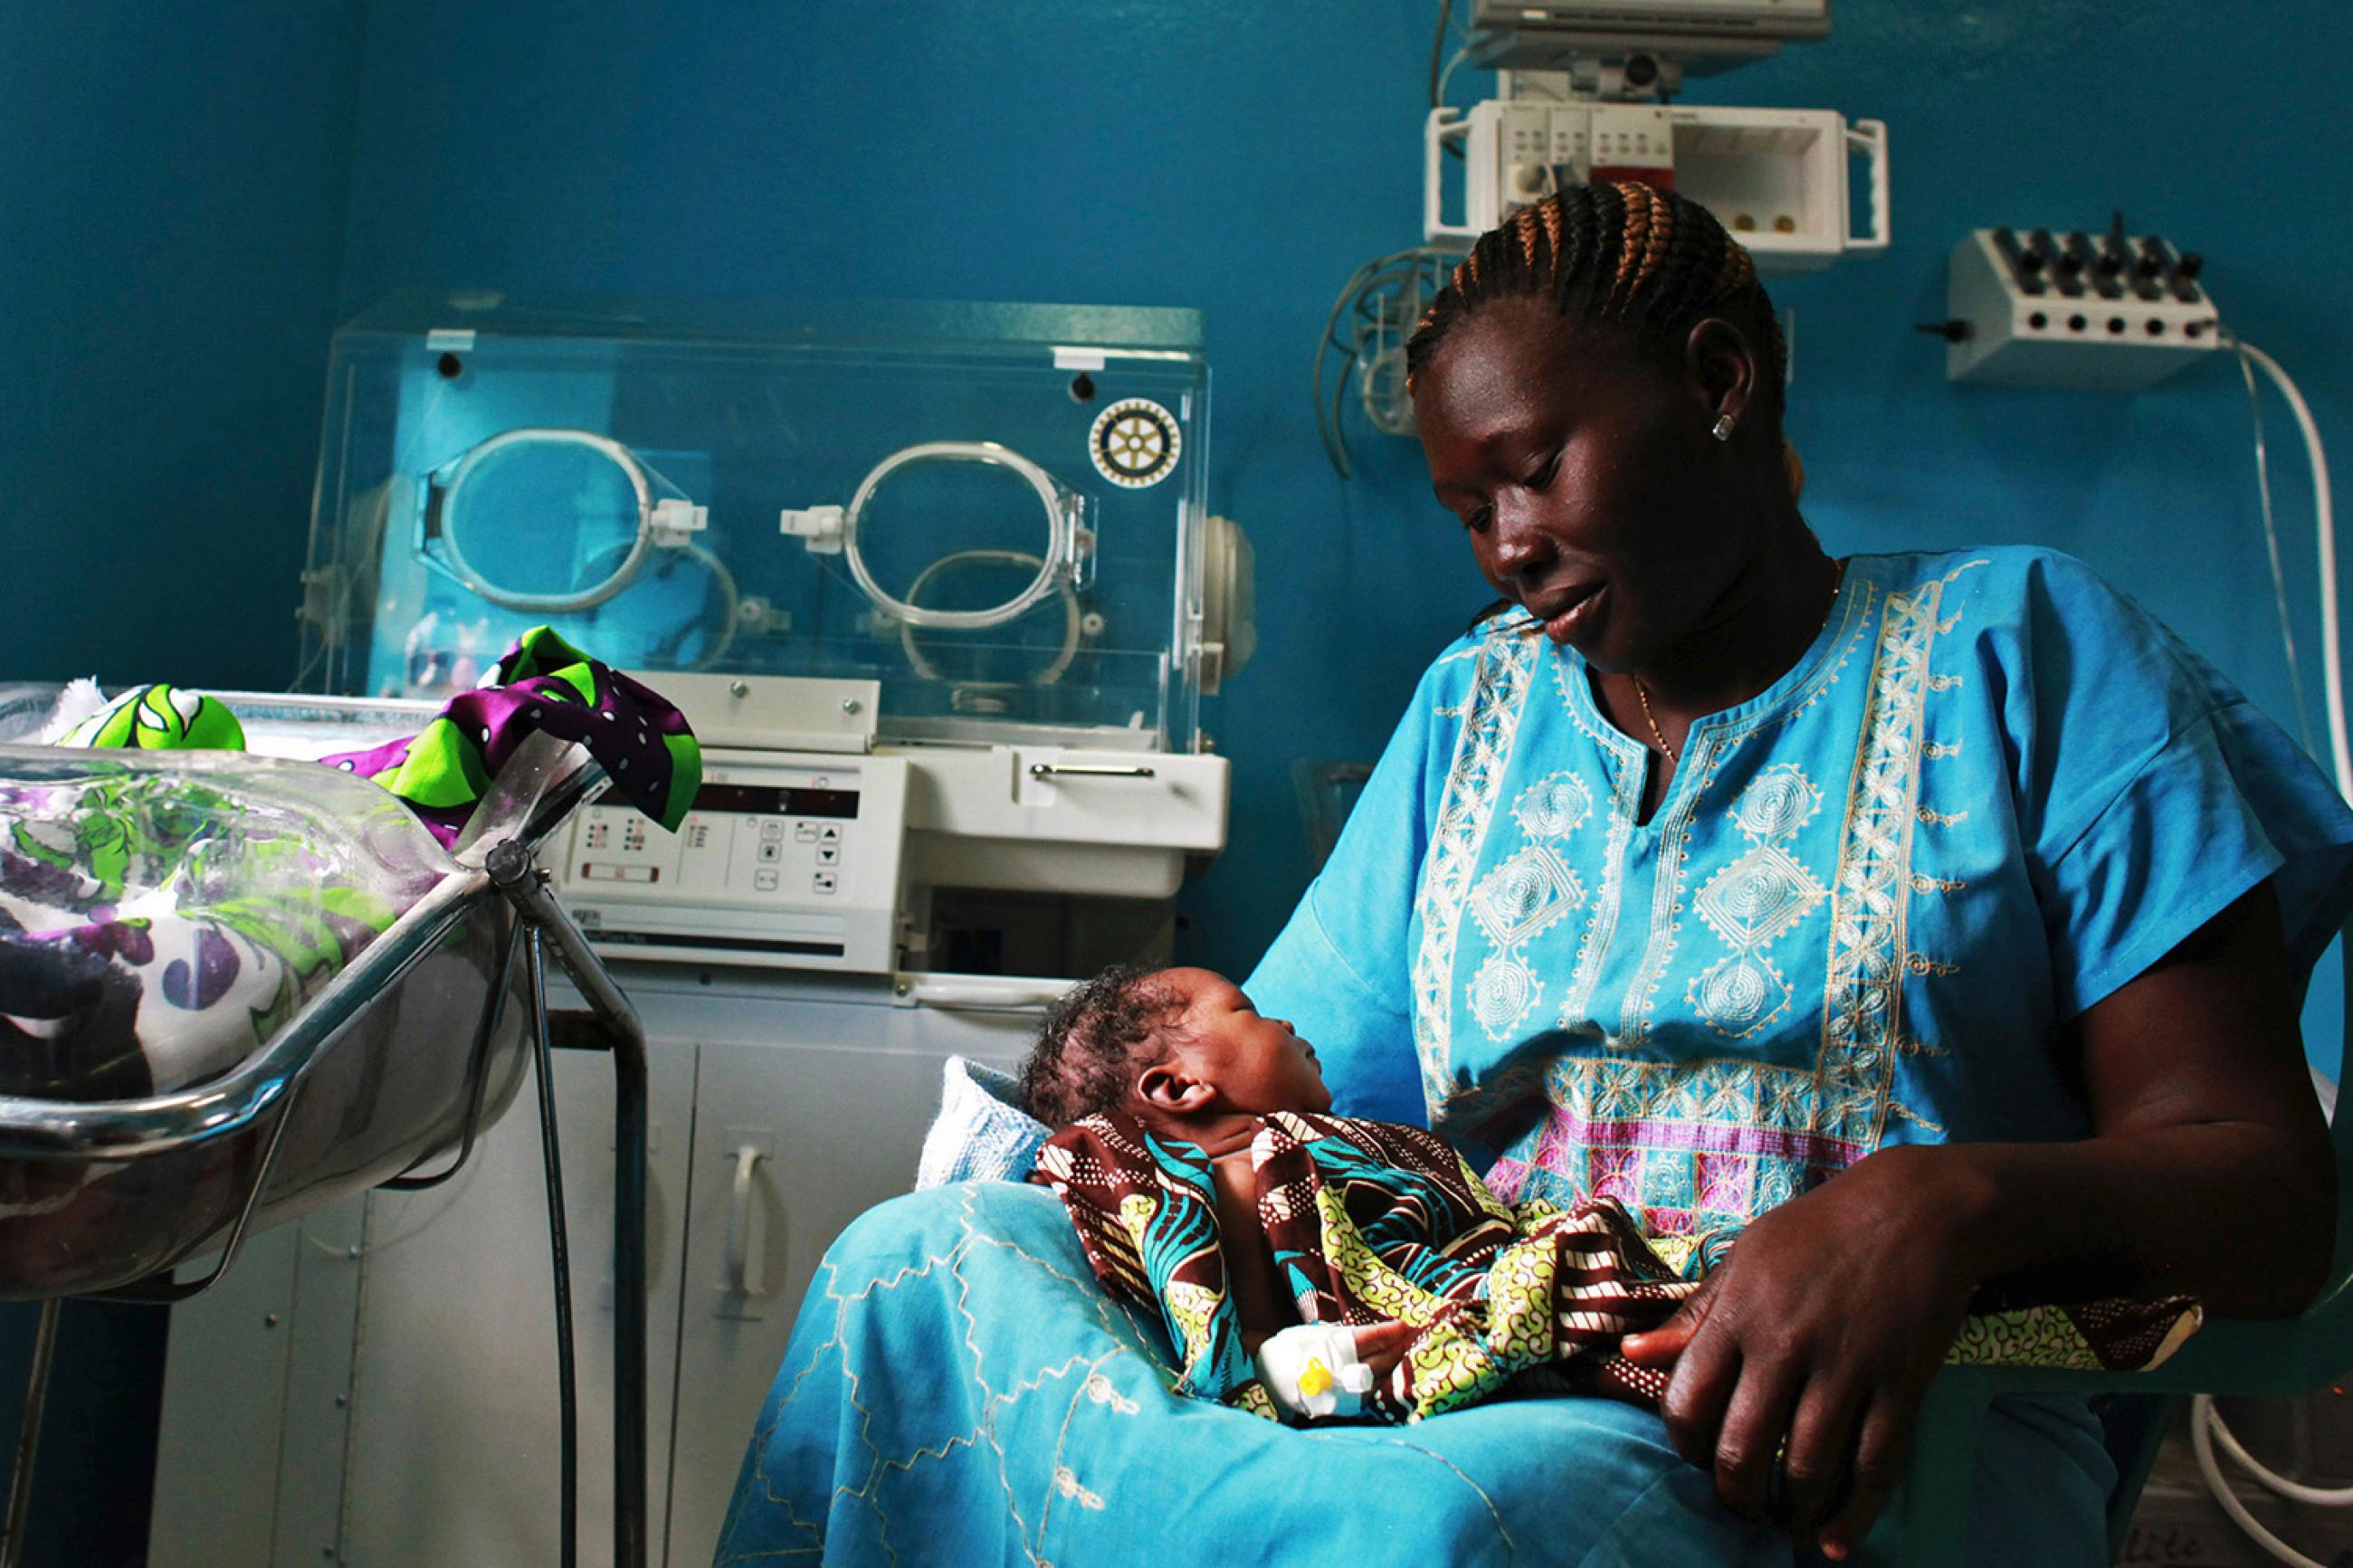 A woman holds her newborn in a nursery at the Juba Teaching Hospital in South Sudan on Apr 3, 2013, which had one of the world's highest maternal mortality rates then at 2,054 per 100,000 live births. Photo shows a woman looking adoringly on her baby, who rests in her lap. REUTERS/Andreea Campeanu